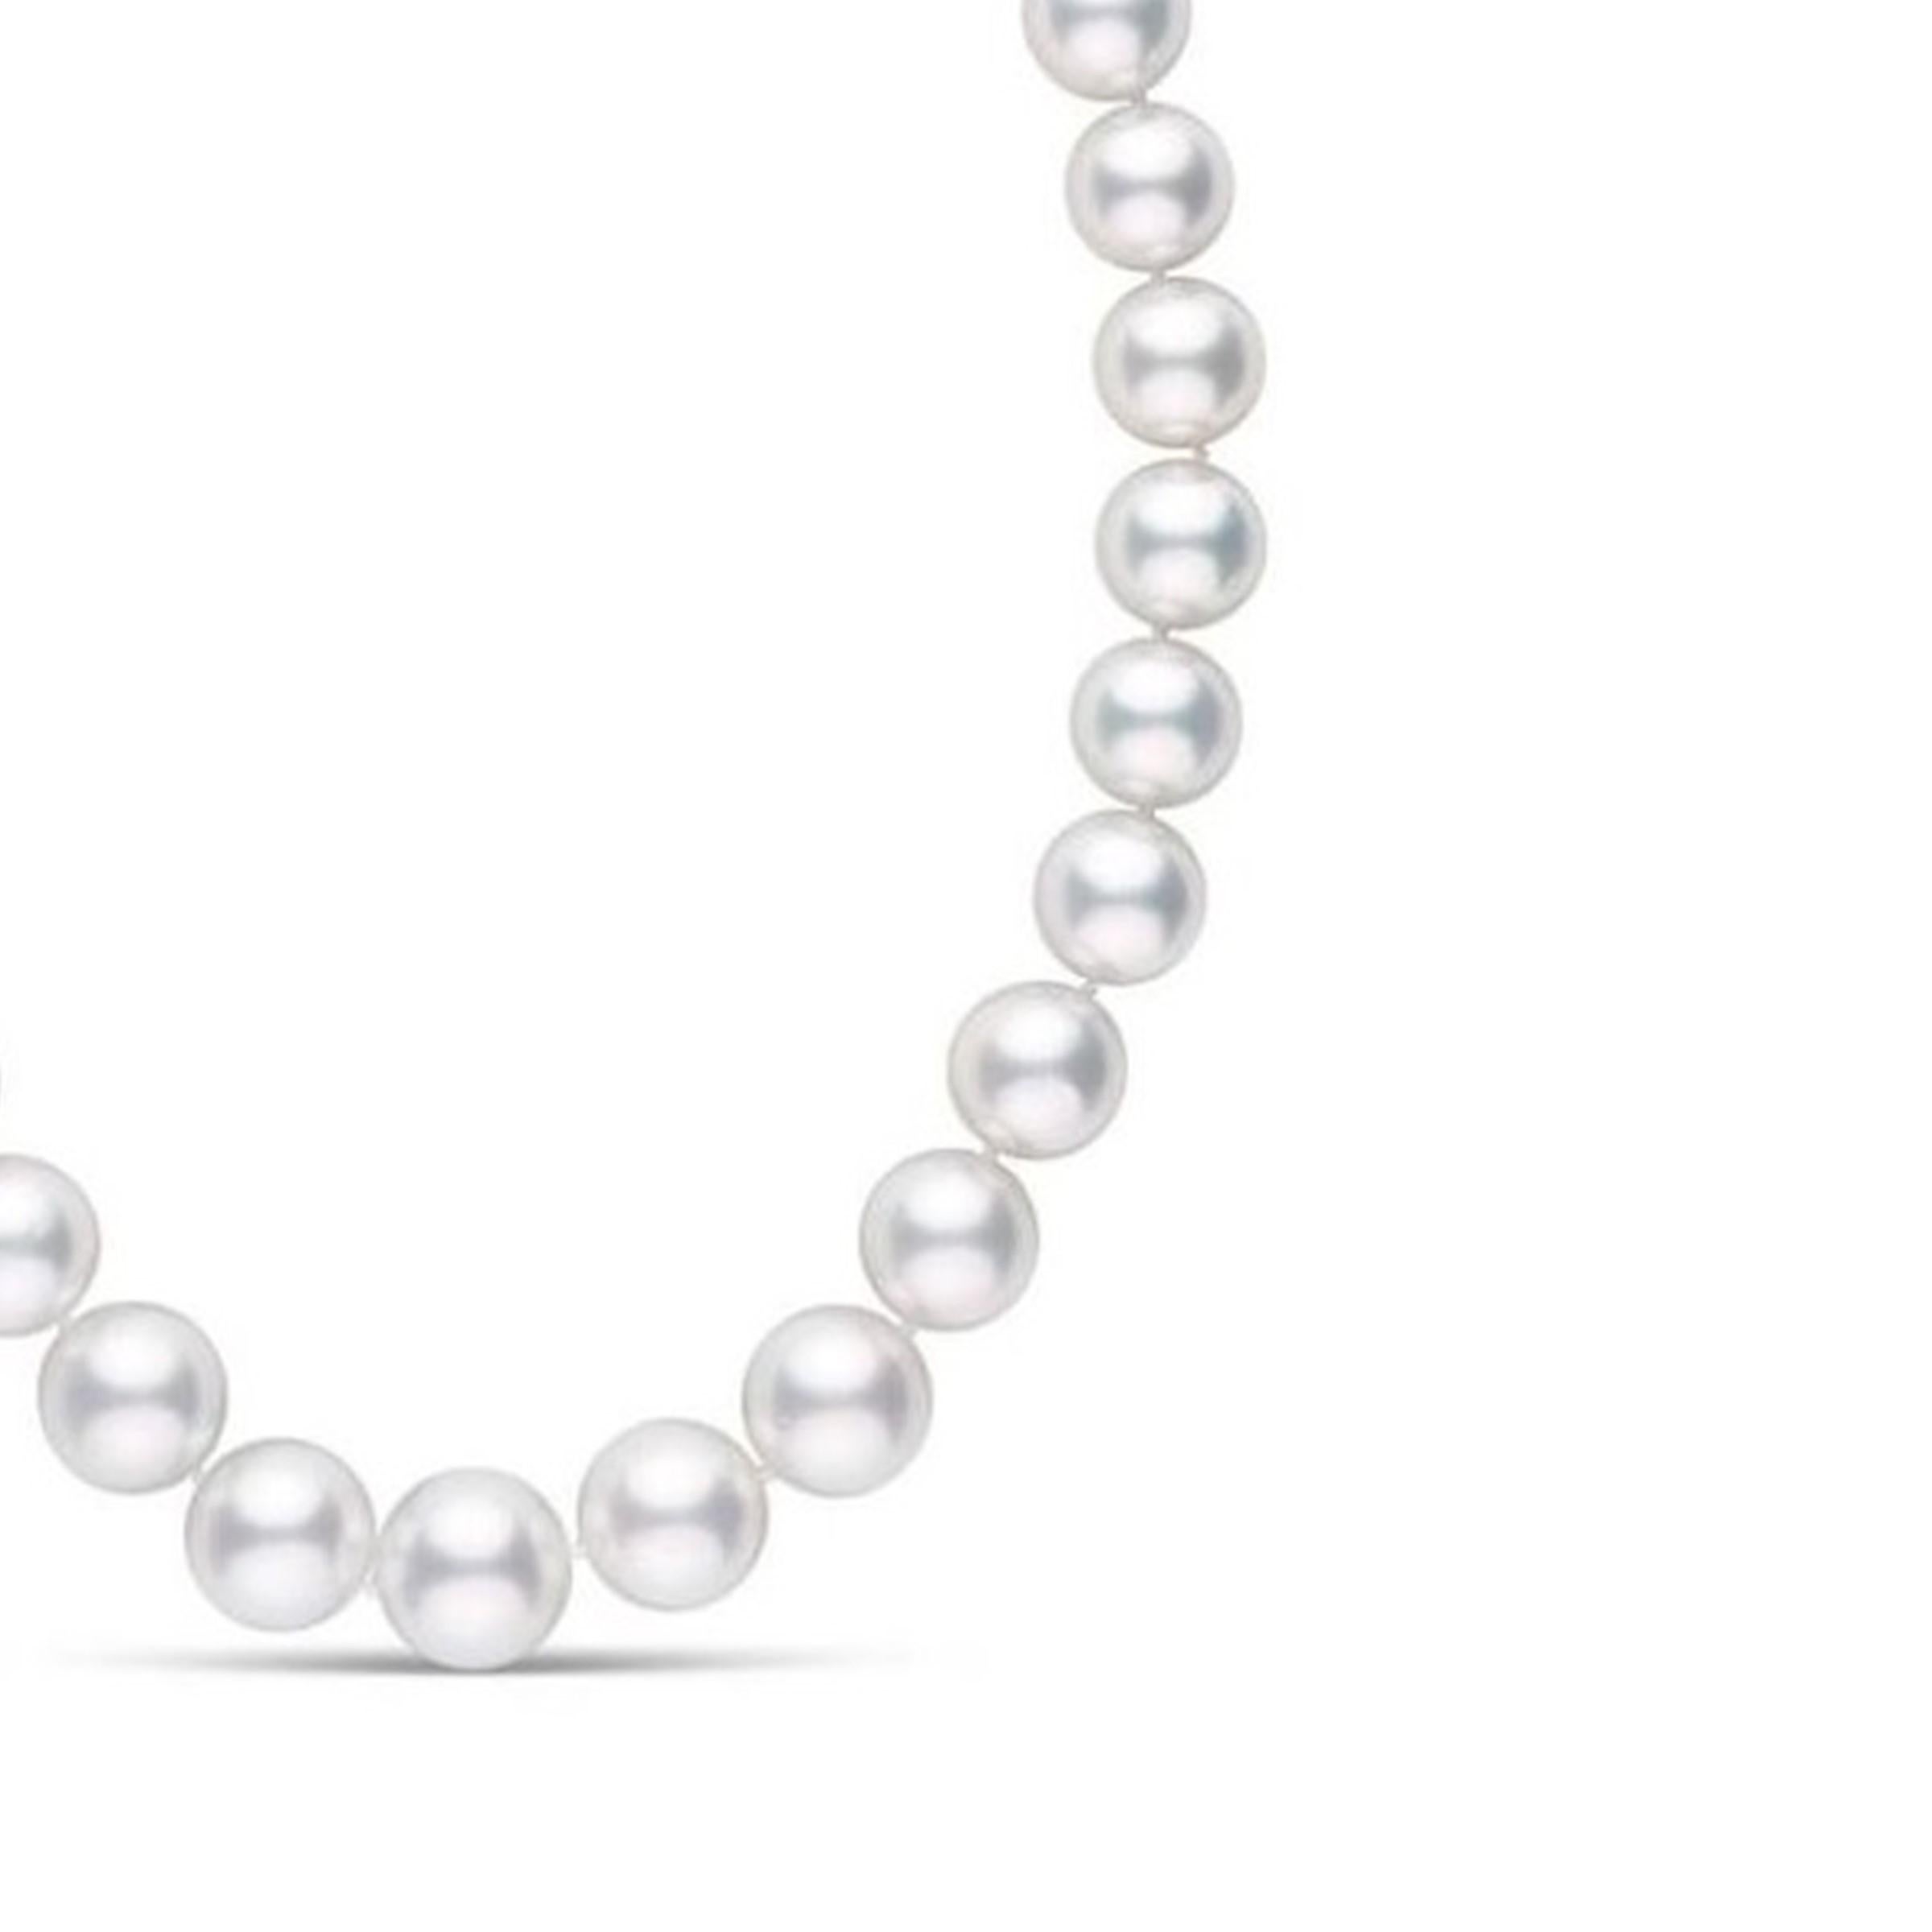 AAA Quality Round South Sea Cultured Pearl Strand Necklace with Diamond Studded Clasp

This exquisite South Sea pearl necklace features 10.0-12.0mm, AAA quality pearls hand-picked for their radiant luster. 
This princess length necklace comes